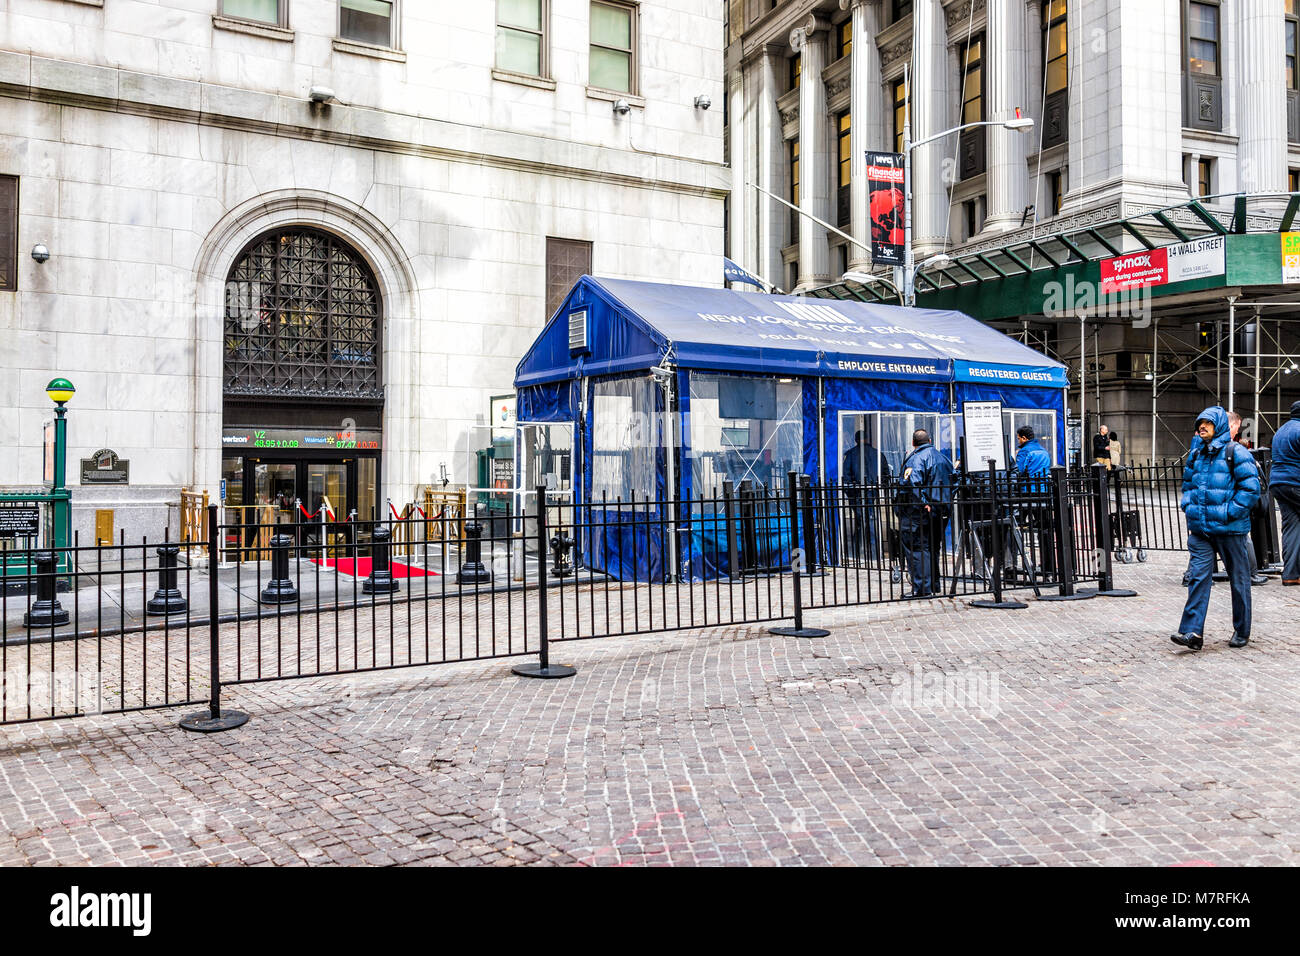 New York City, USA - October 30, 2017: Wall street stock exchange building entrance, security, police guards, railing in NYC Manhattan lower financial Stock Photo